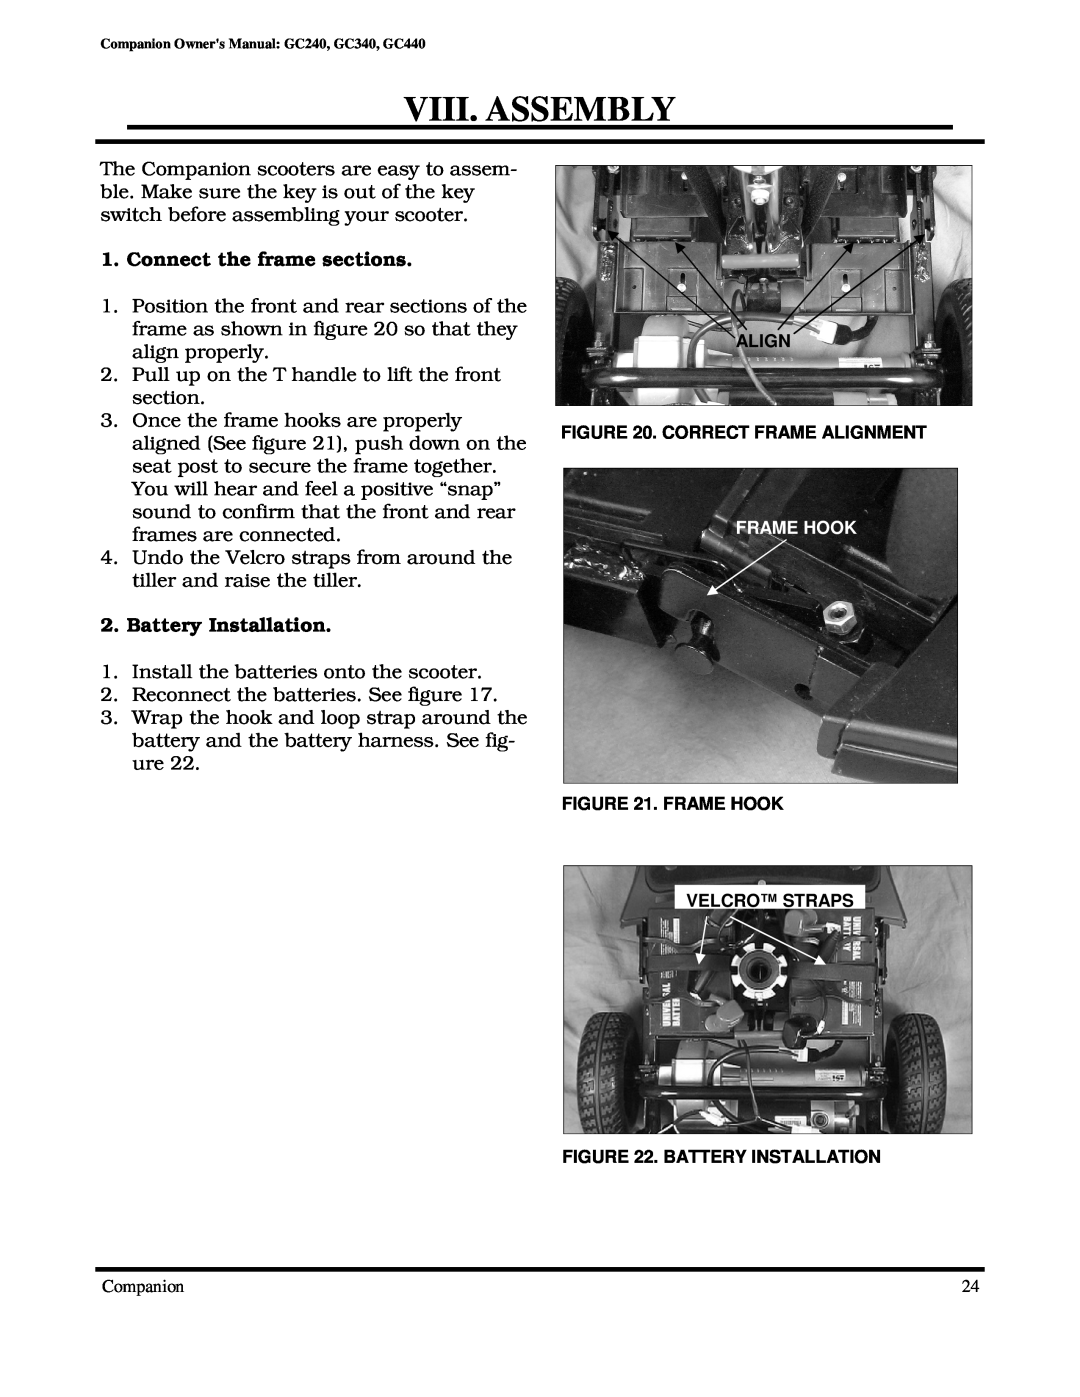 Golden Technologies GC240, GC340, GC440 owner manual Viii. Assembly, Connect the frame sections, Battery Installation 